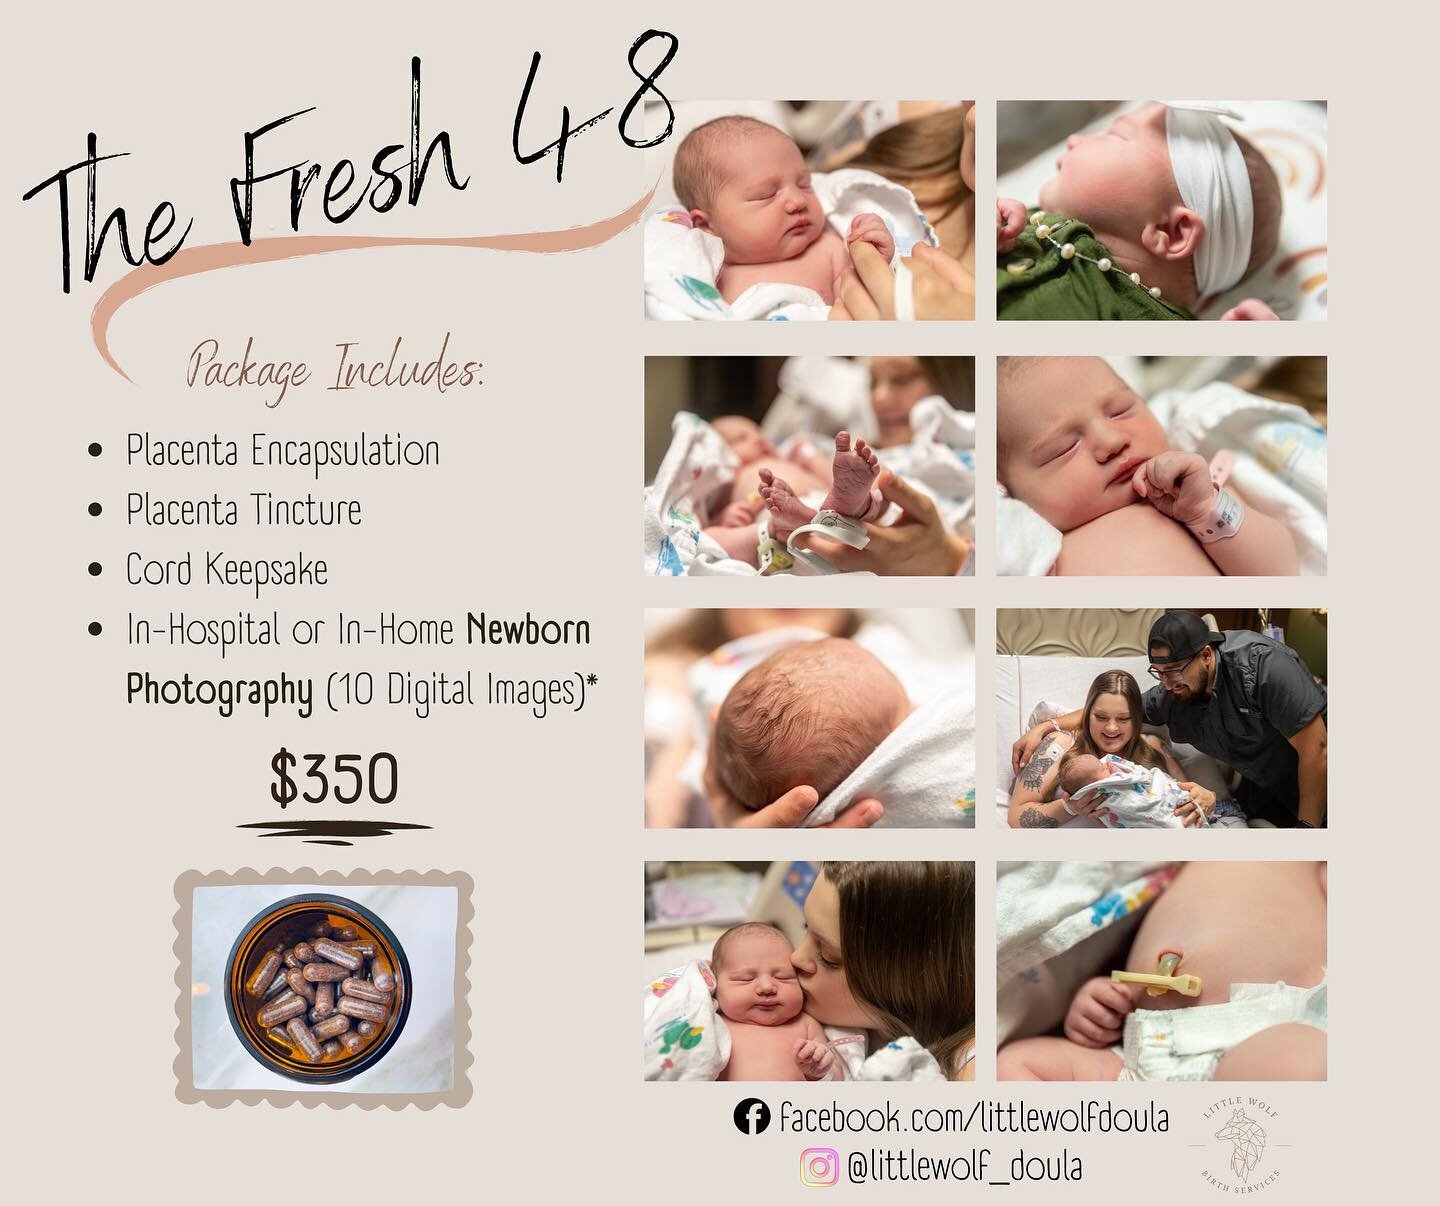 Introducing.... The ✨ Fresh 48 ✨ Package!!

I am SO excited about this package! It includes:

🌙 In-Hospital or In-Home Newborn Photography (10 Digital Images)
🌙 Placenta Encapsulation
🌙 Cord Keepsake
🌙 Placenta Tincture

Pickup of placenta and de